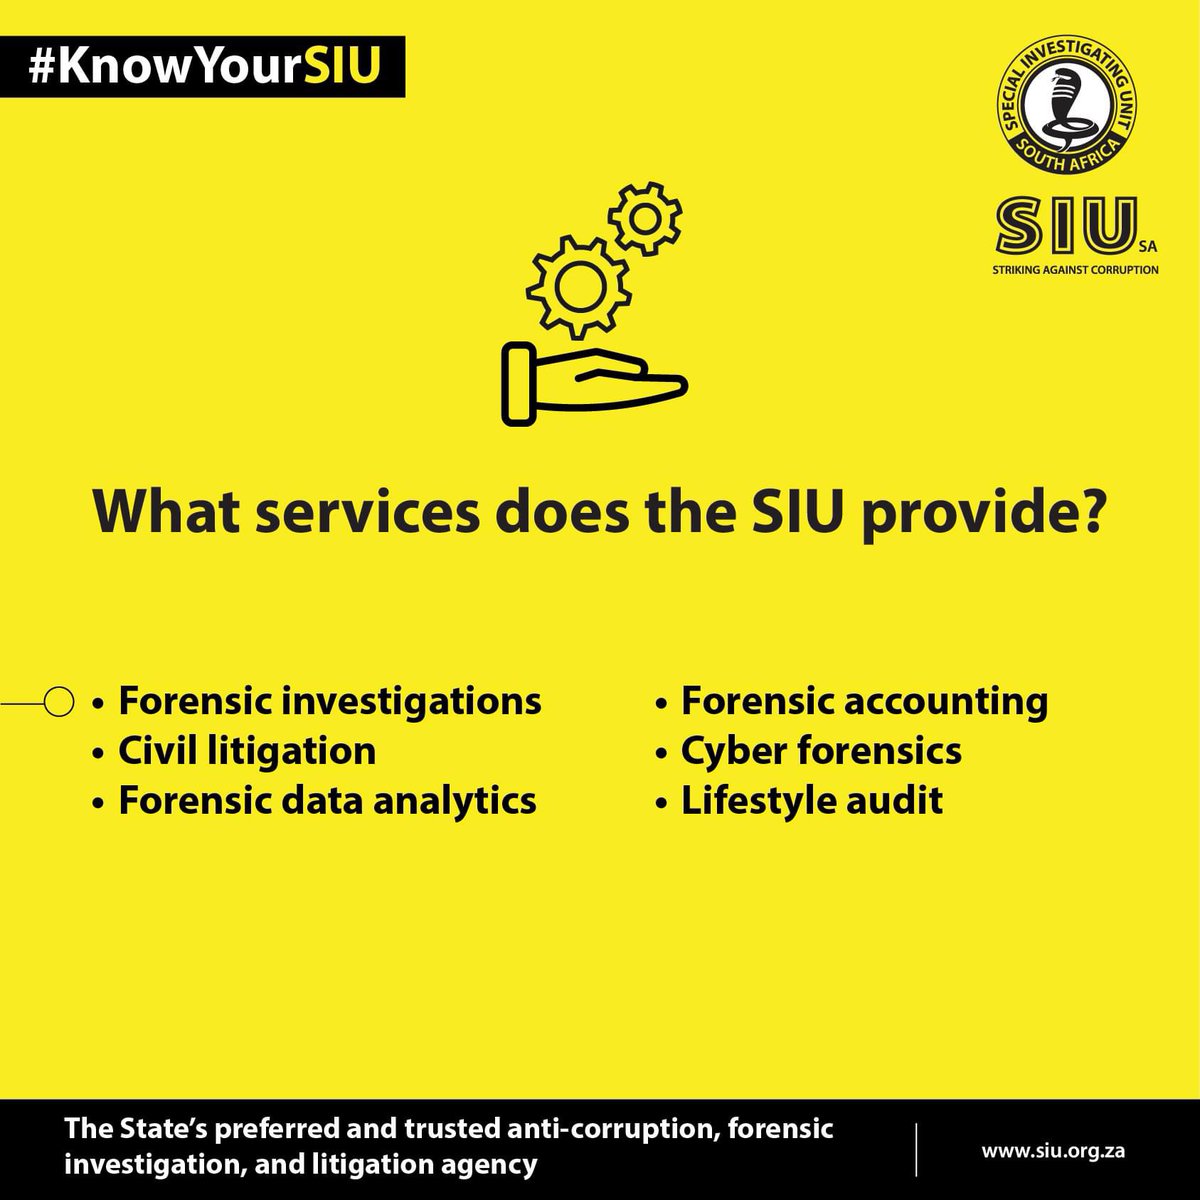 #KnowYourSIU| The SIU aims to be the State's preferred and trusted anti-corruption, forensic investigation and litigation agency. Here's a list of expertise we provide for the State: